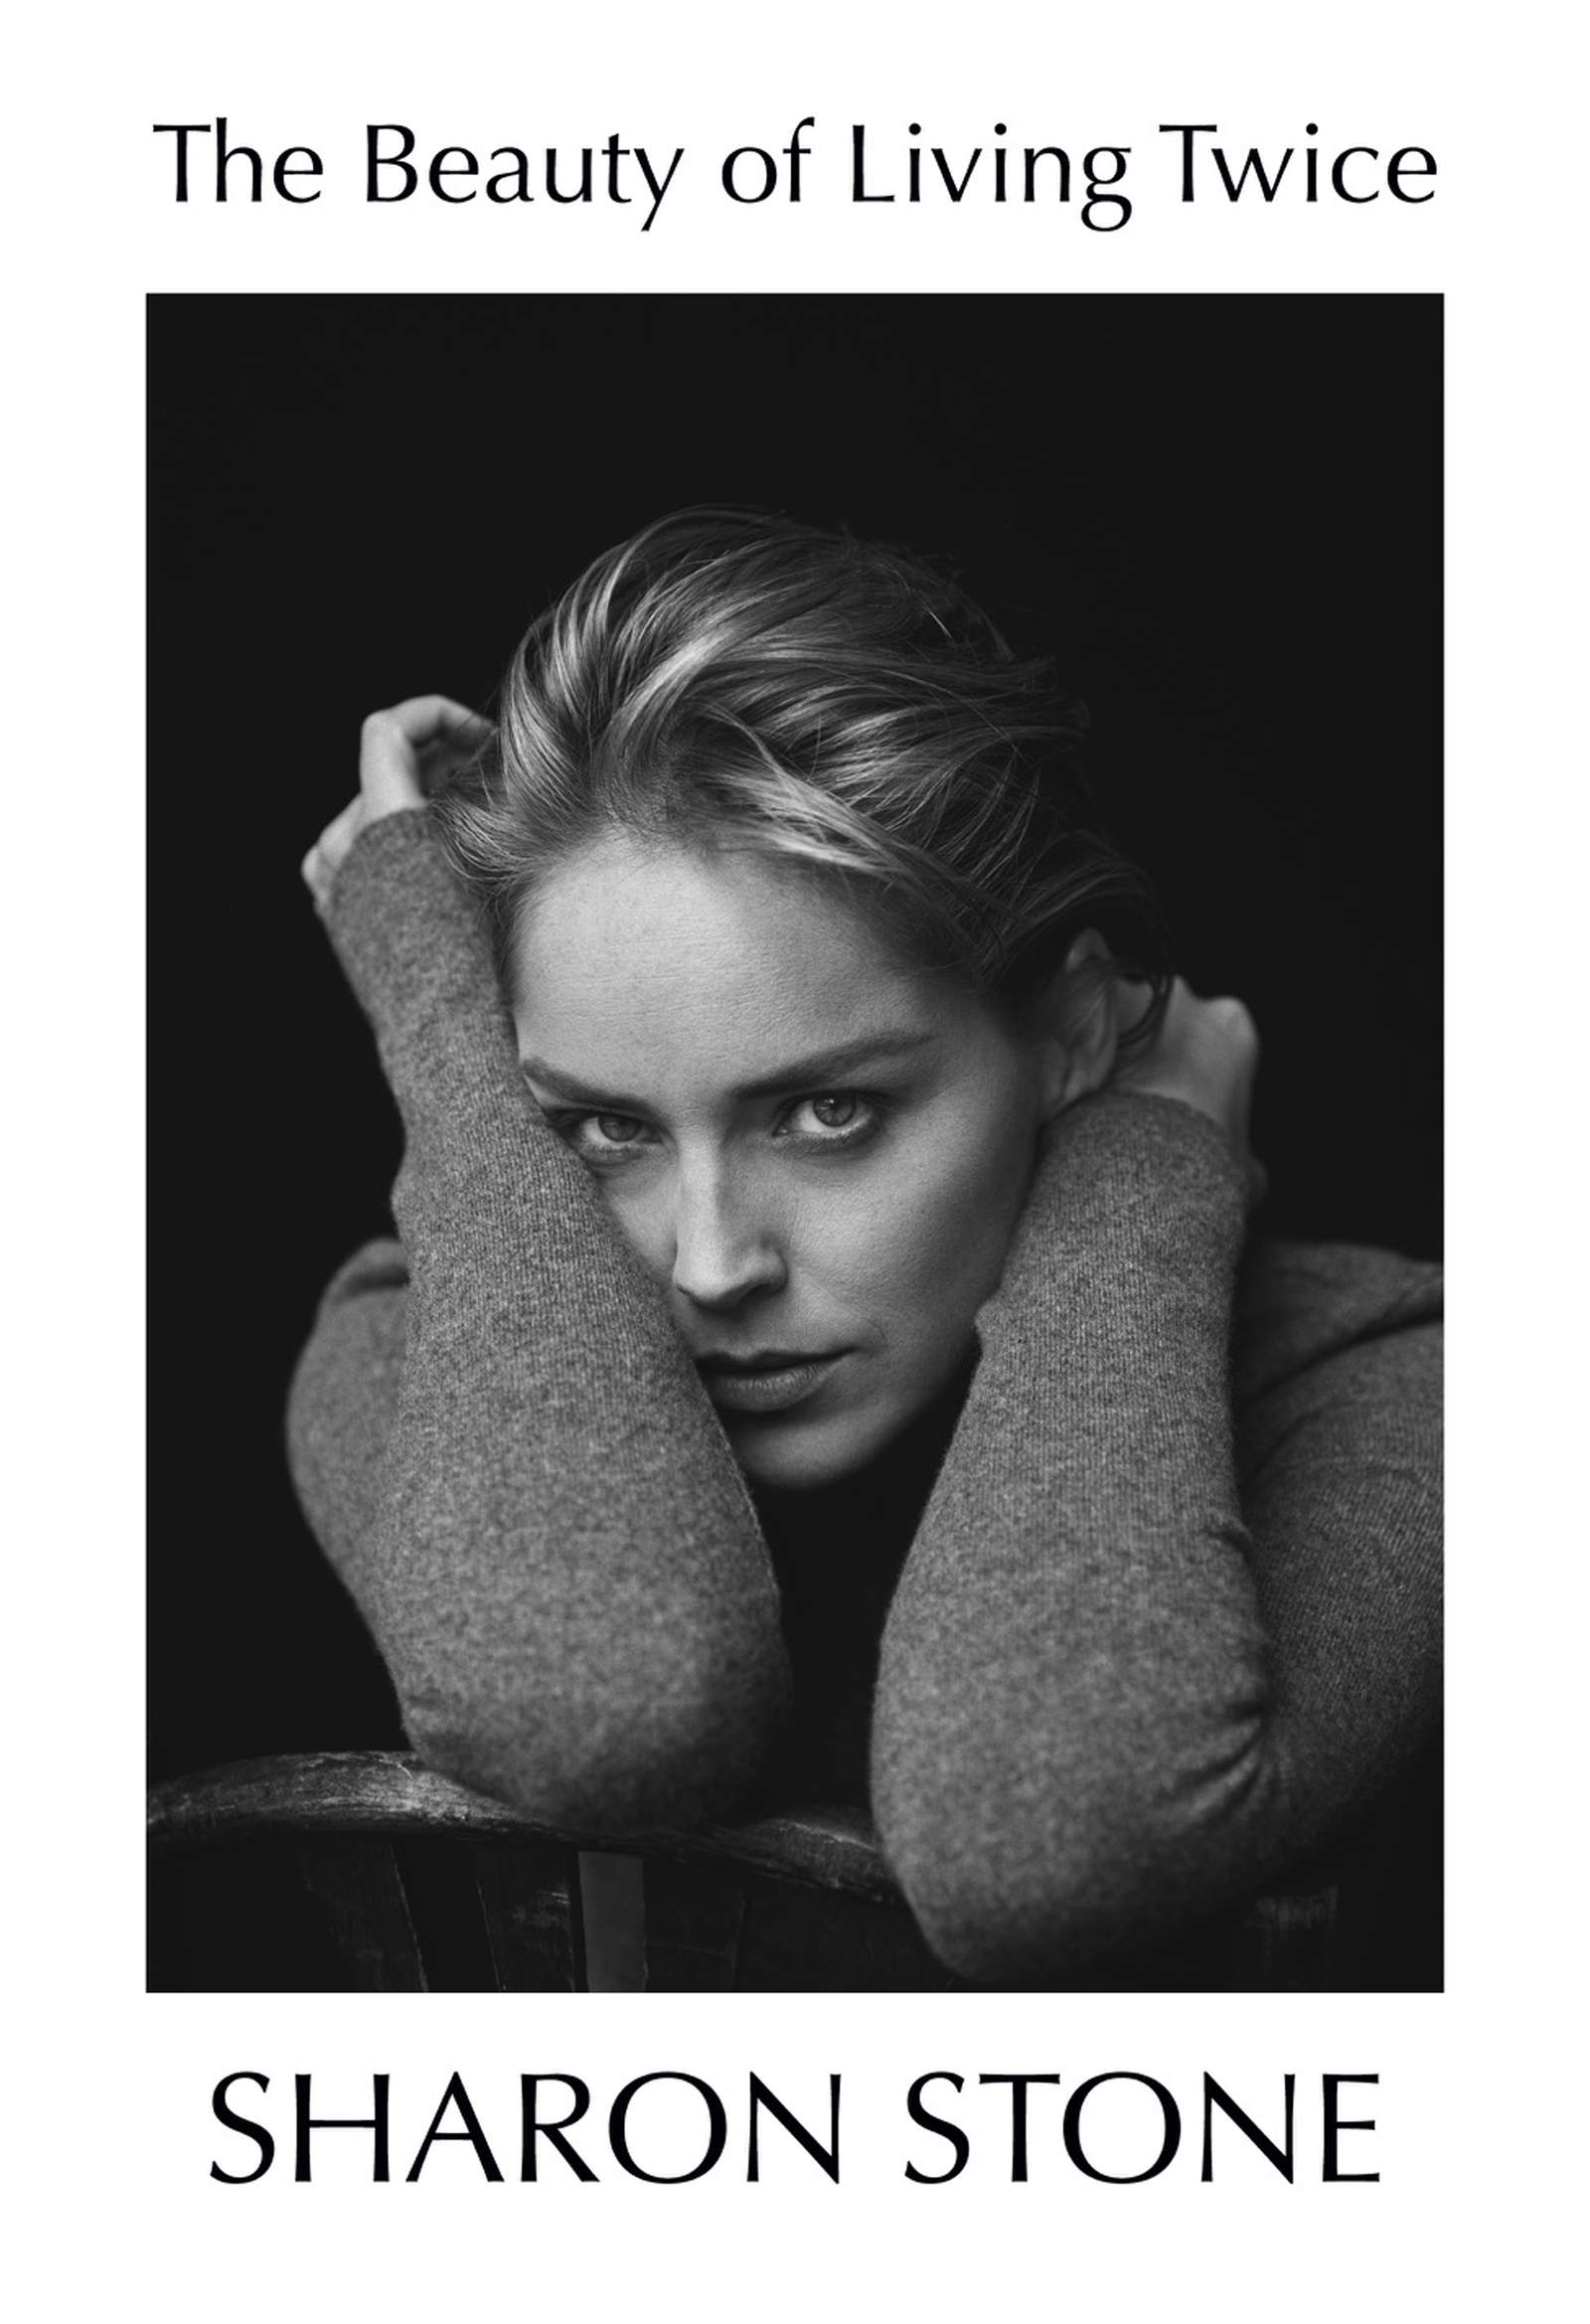 Sharon Stone writes memoir that doesn't 'pull any punches'